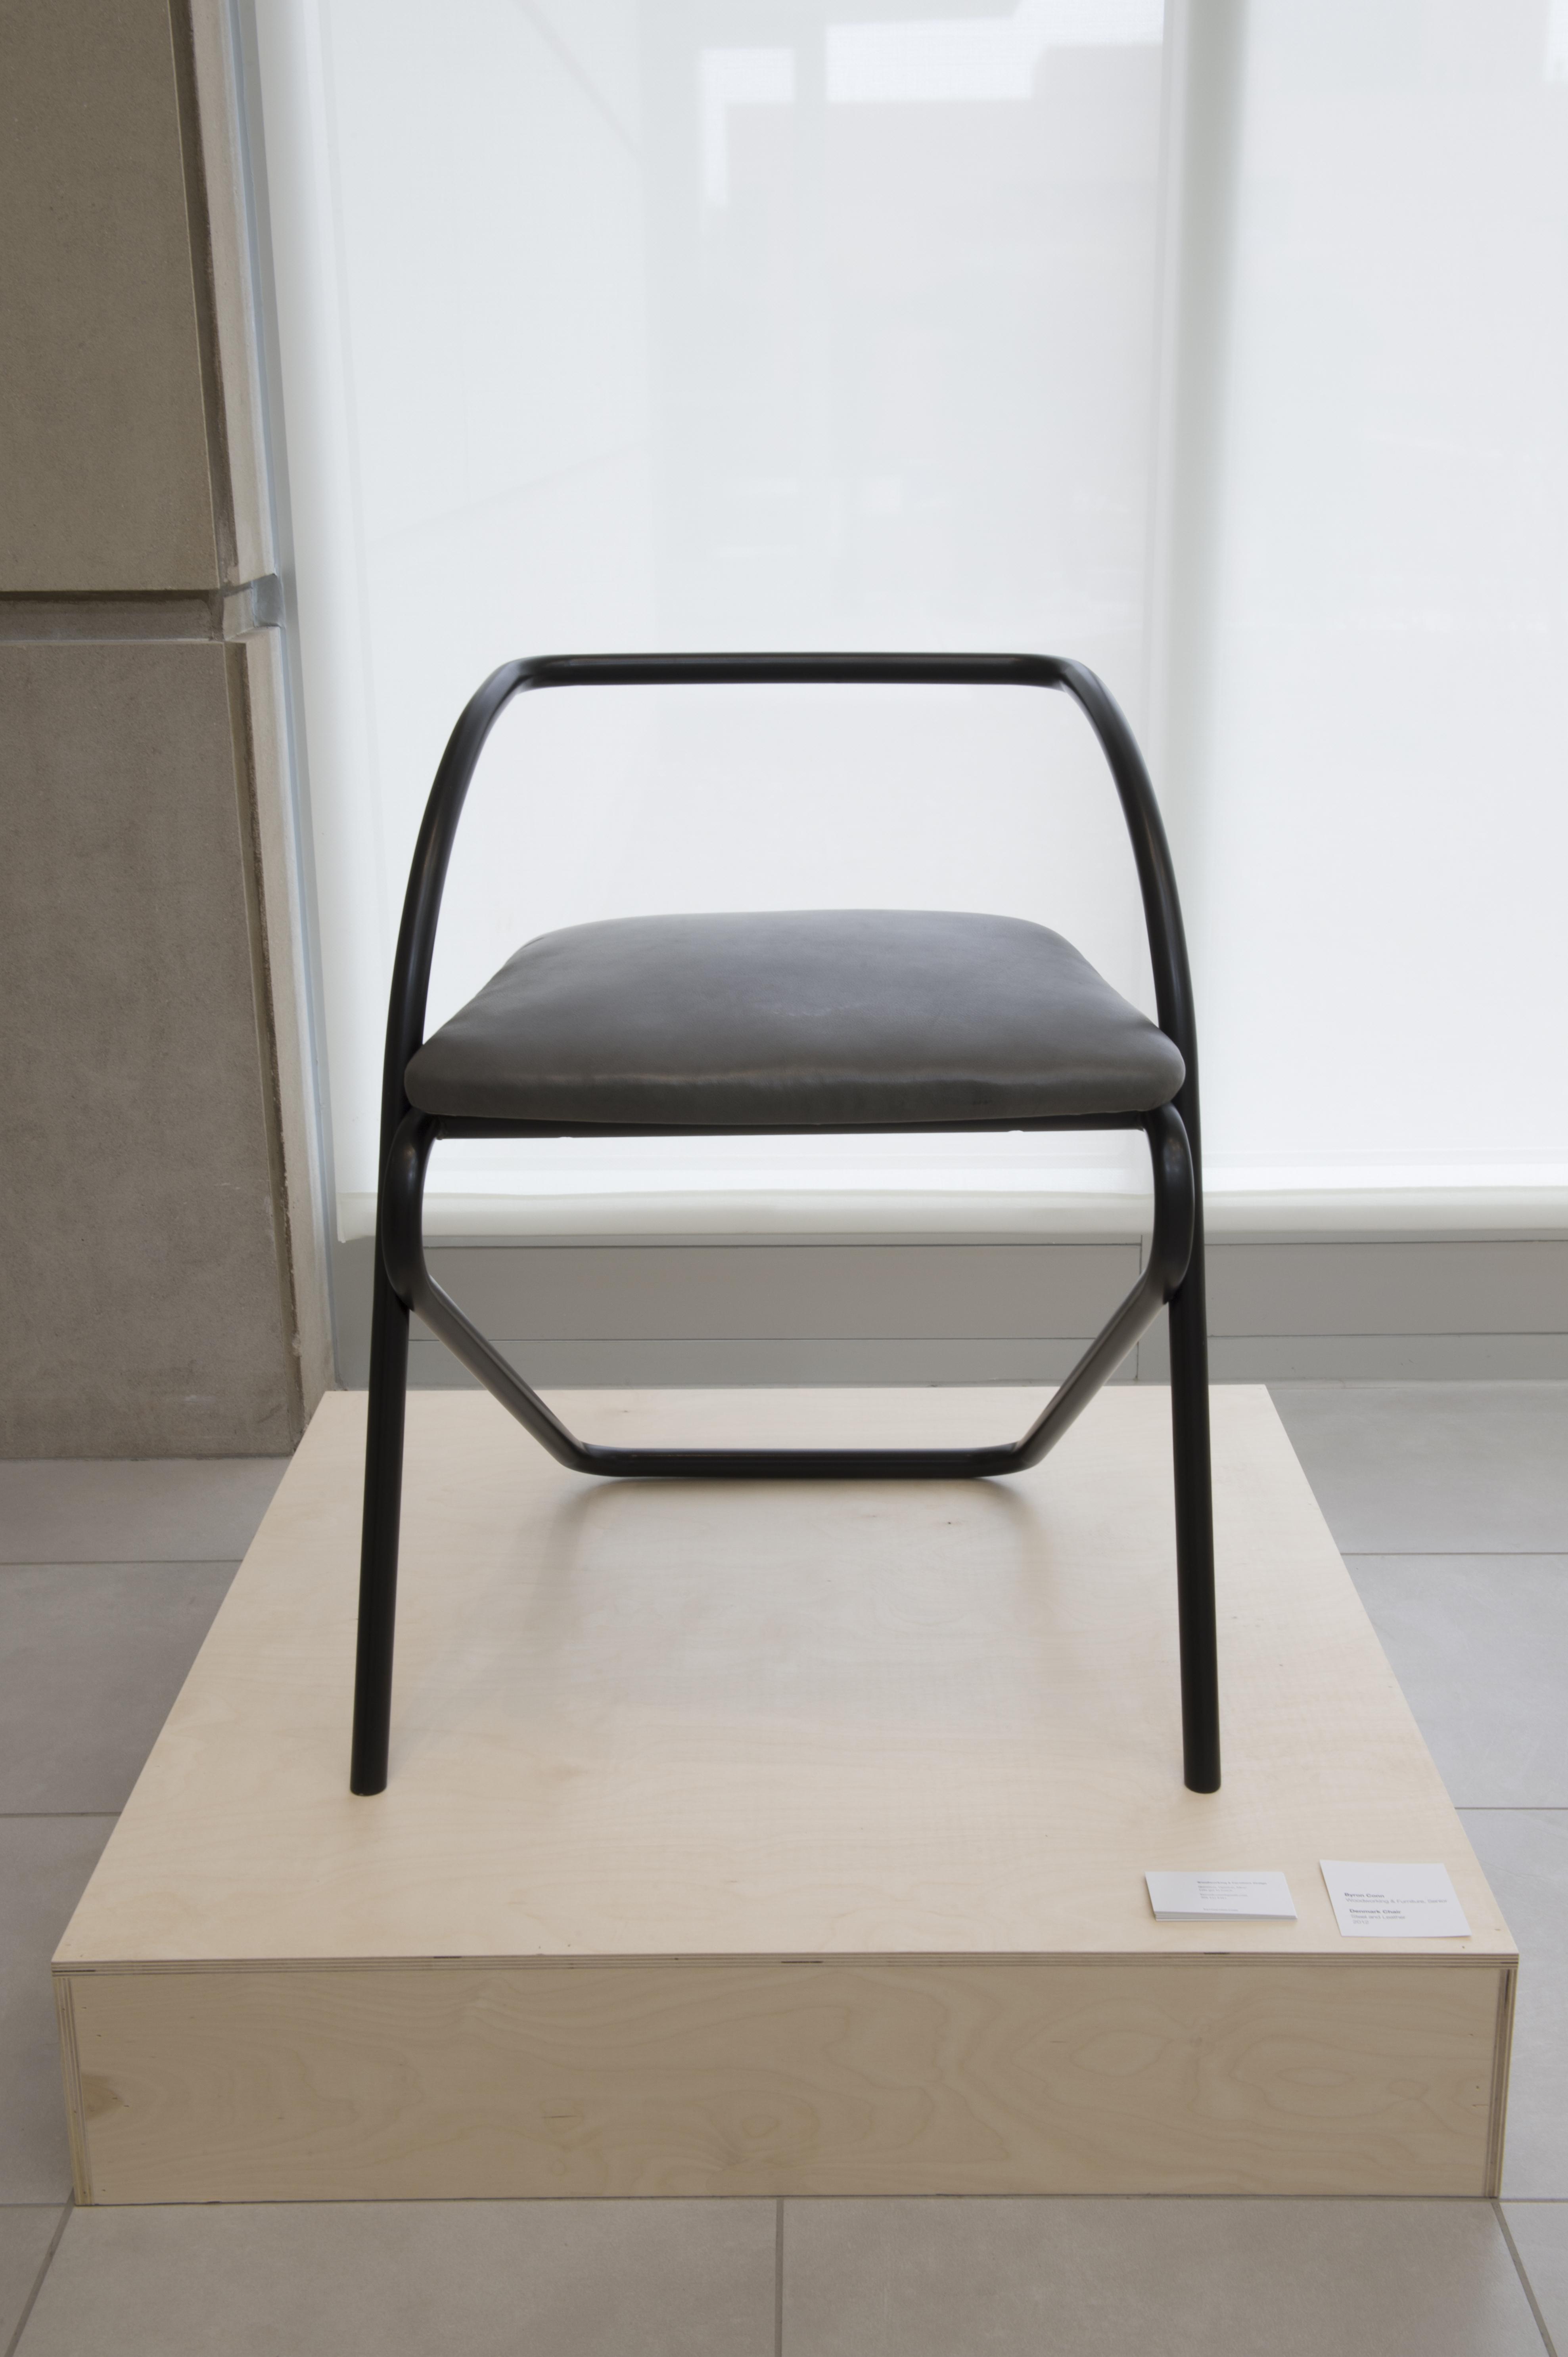 A black chair sits on display in University Gallery.